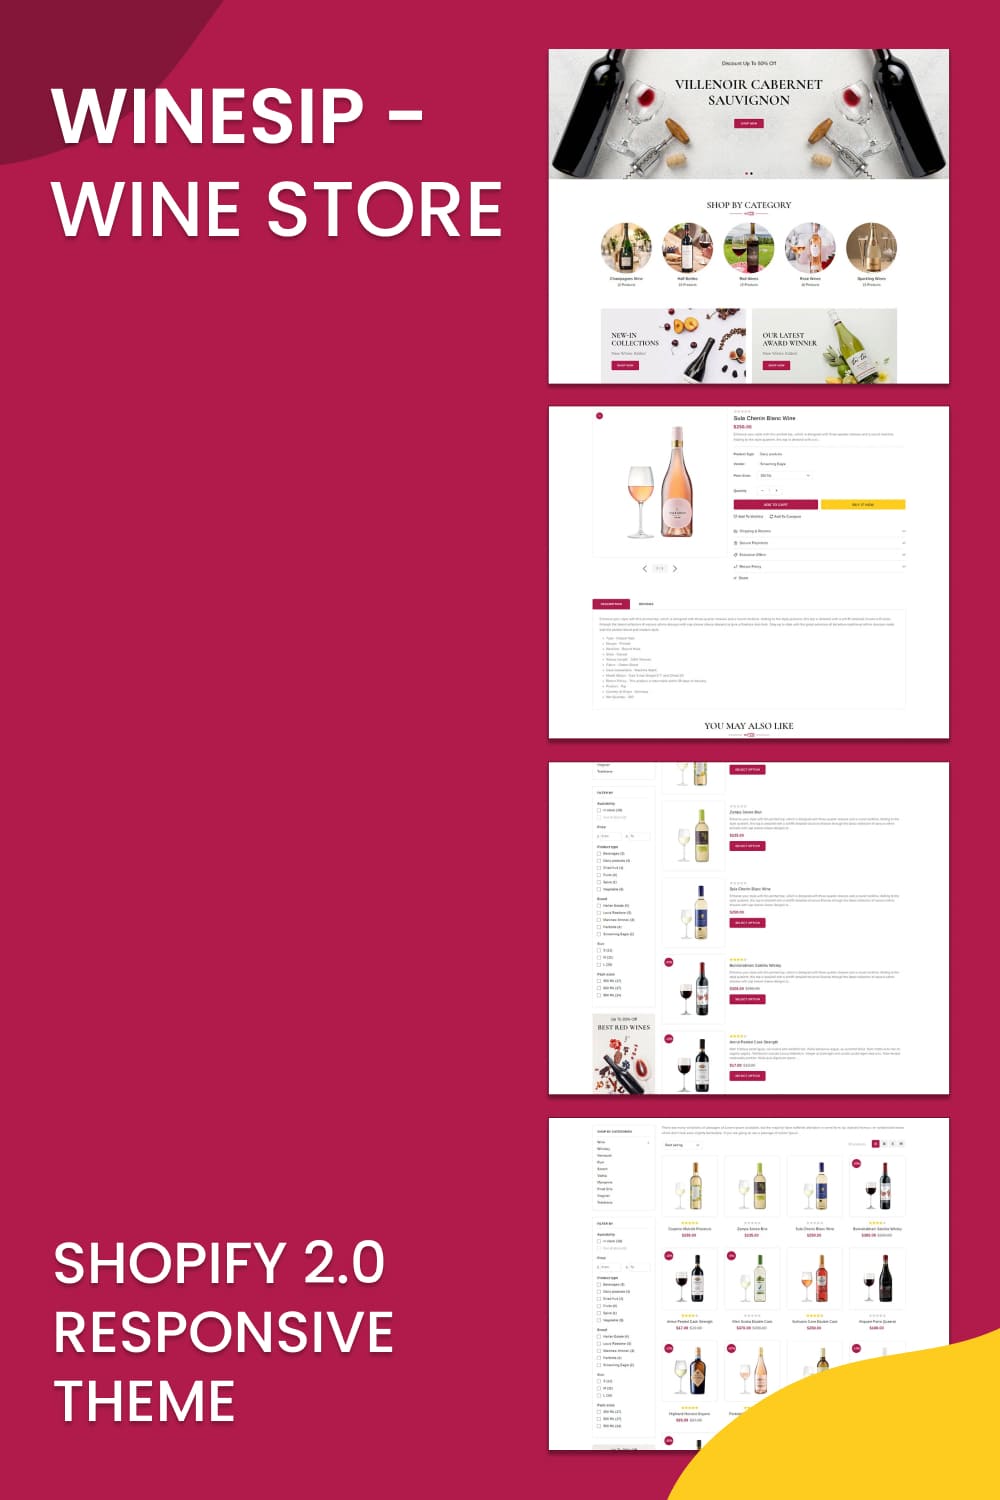 Winesip - Wine store, shopify 2.0 responsive theme, picture for pinterest 1000x1500.